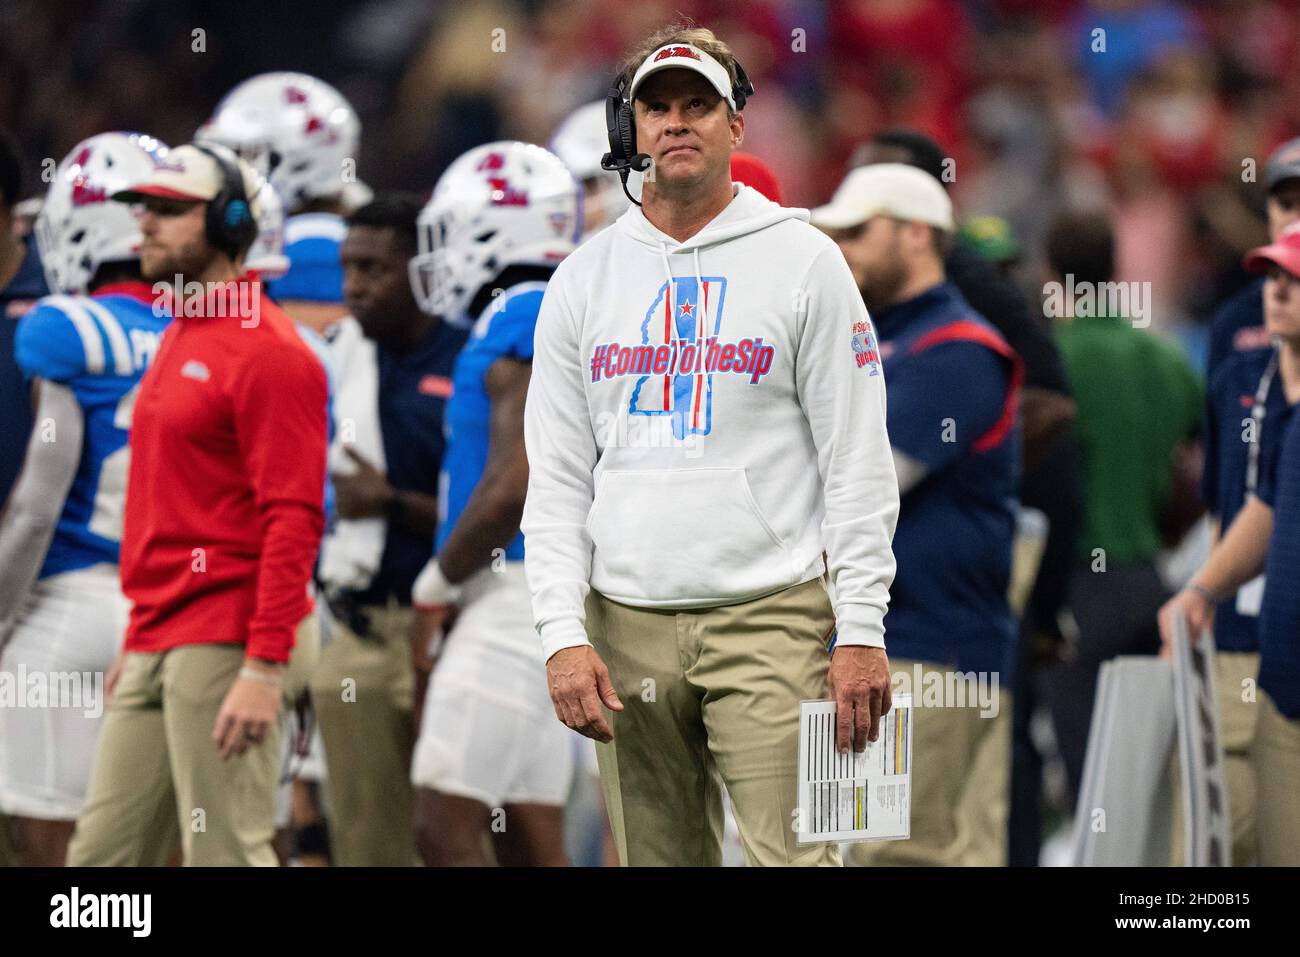 Ole Miss Rebels head coach Lane Kiffin looks on during the NCAA College Football Sugar Bowl game between the Baylor Bears and the Ole Miss Rebels on Saturday January 1, 2022 at the Caesars Superdome in New Orleans, Louisiana. Jacob Kupferman/CSM Stock Photo